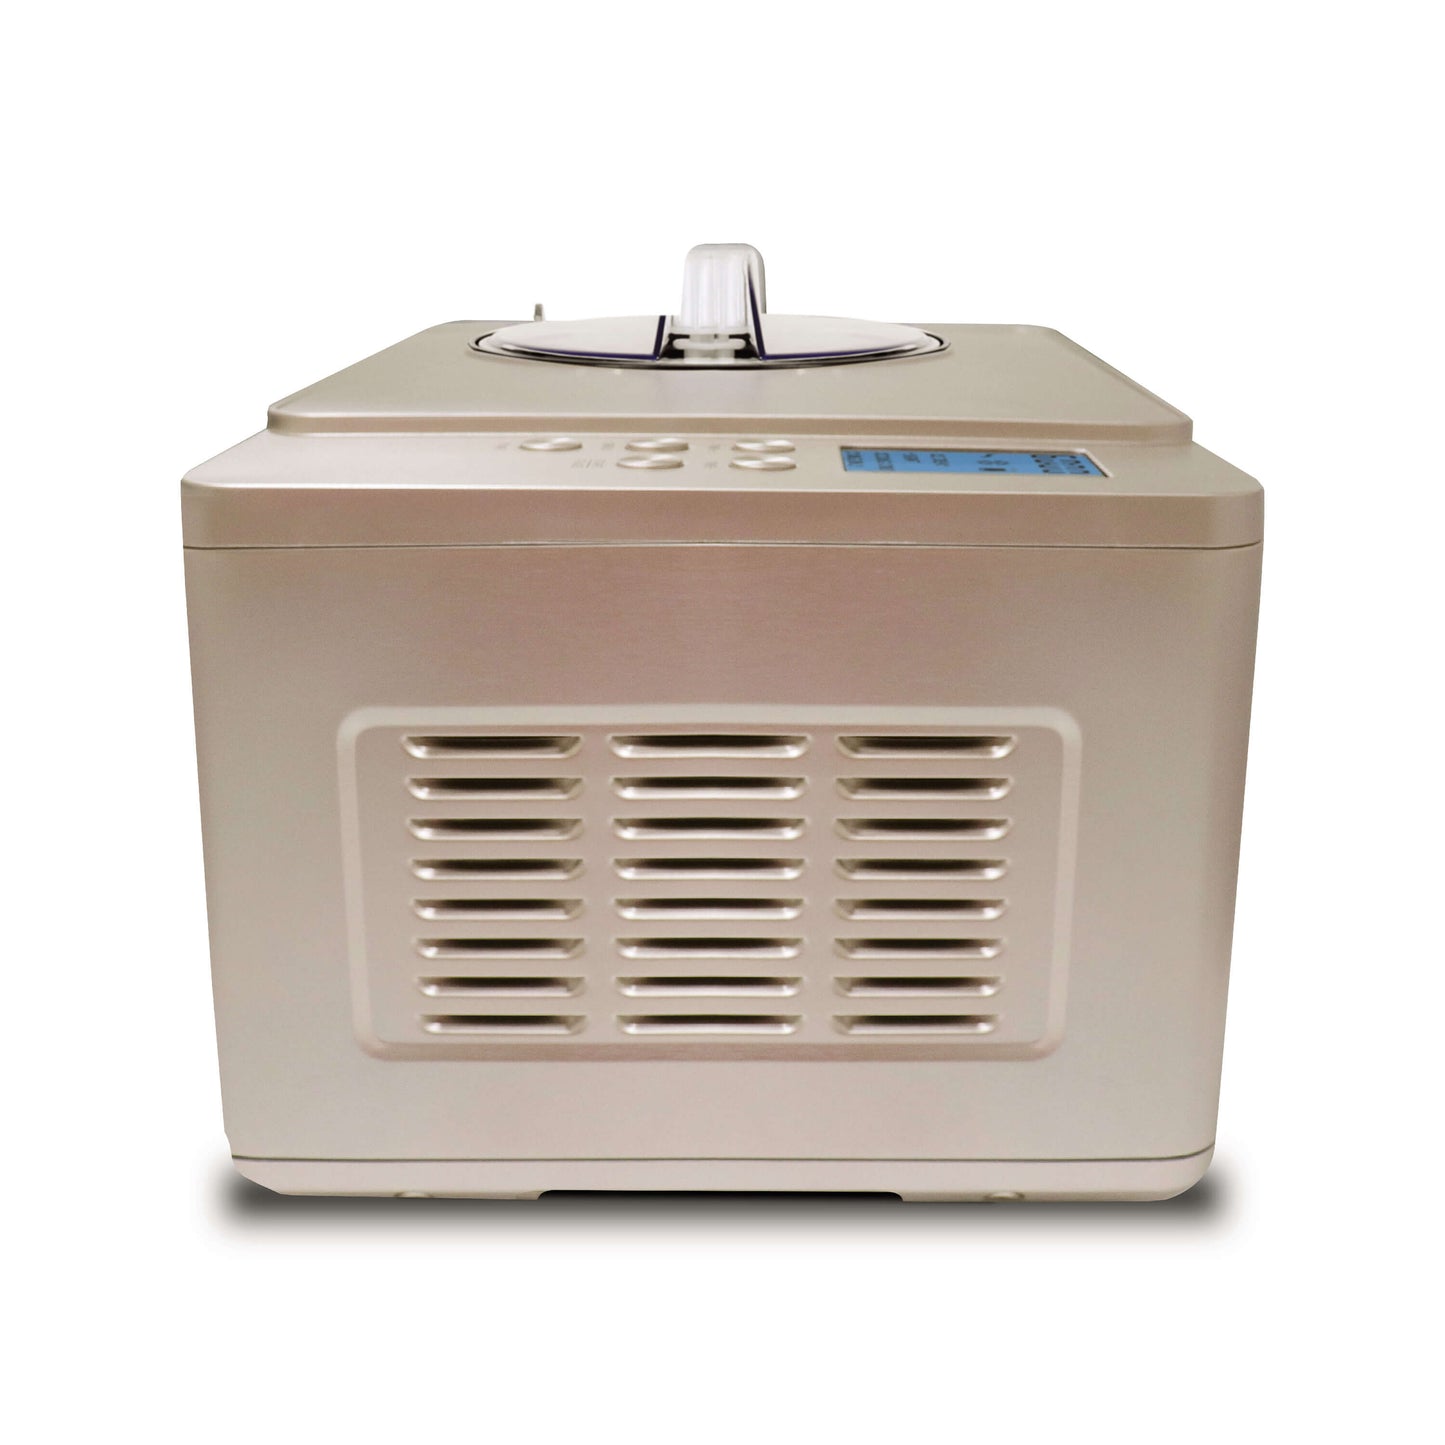 Whynter Ice Cream Makers Whynter ICM-220CGY 2 Quart Capacity Automatic Compressor Ice Cream Maker & Yogurt Function with Stainless Steel Bowl in Champagne Gold